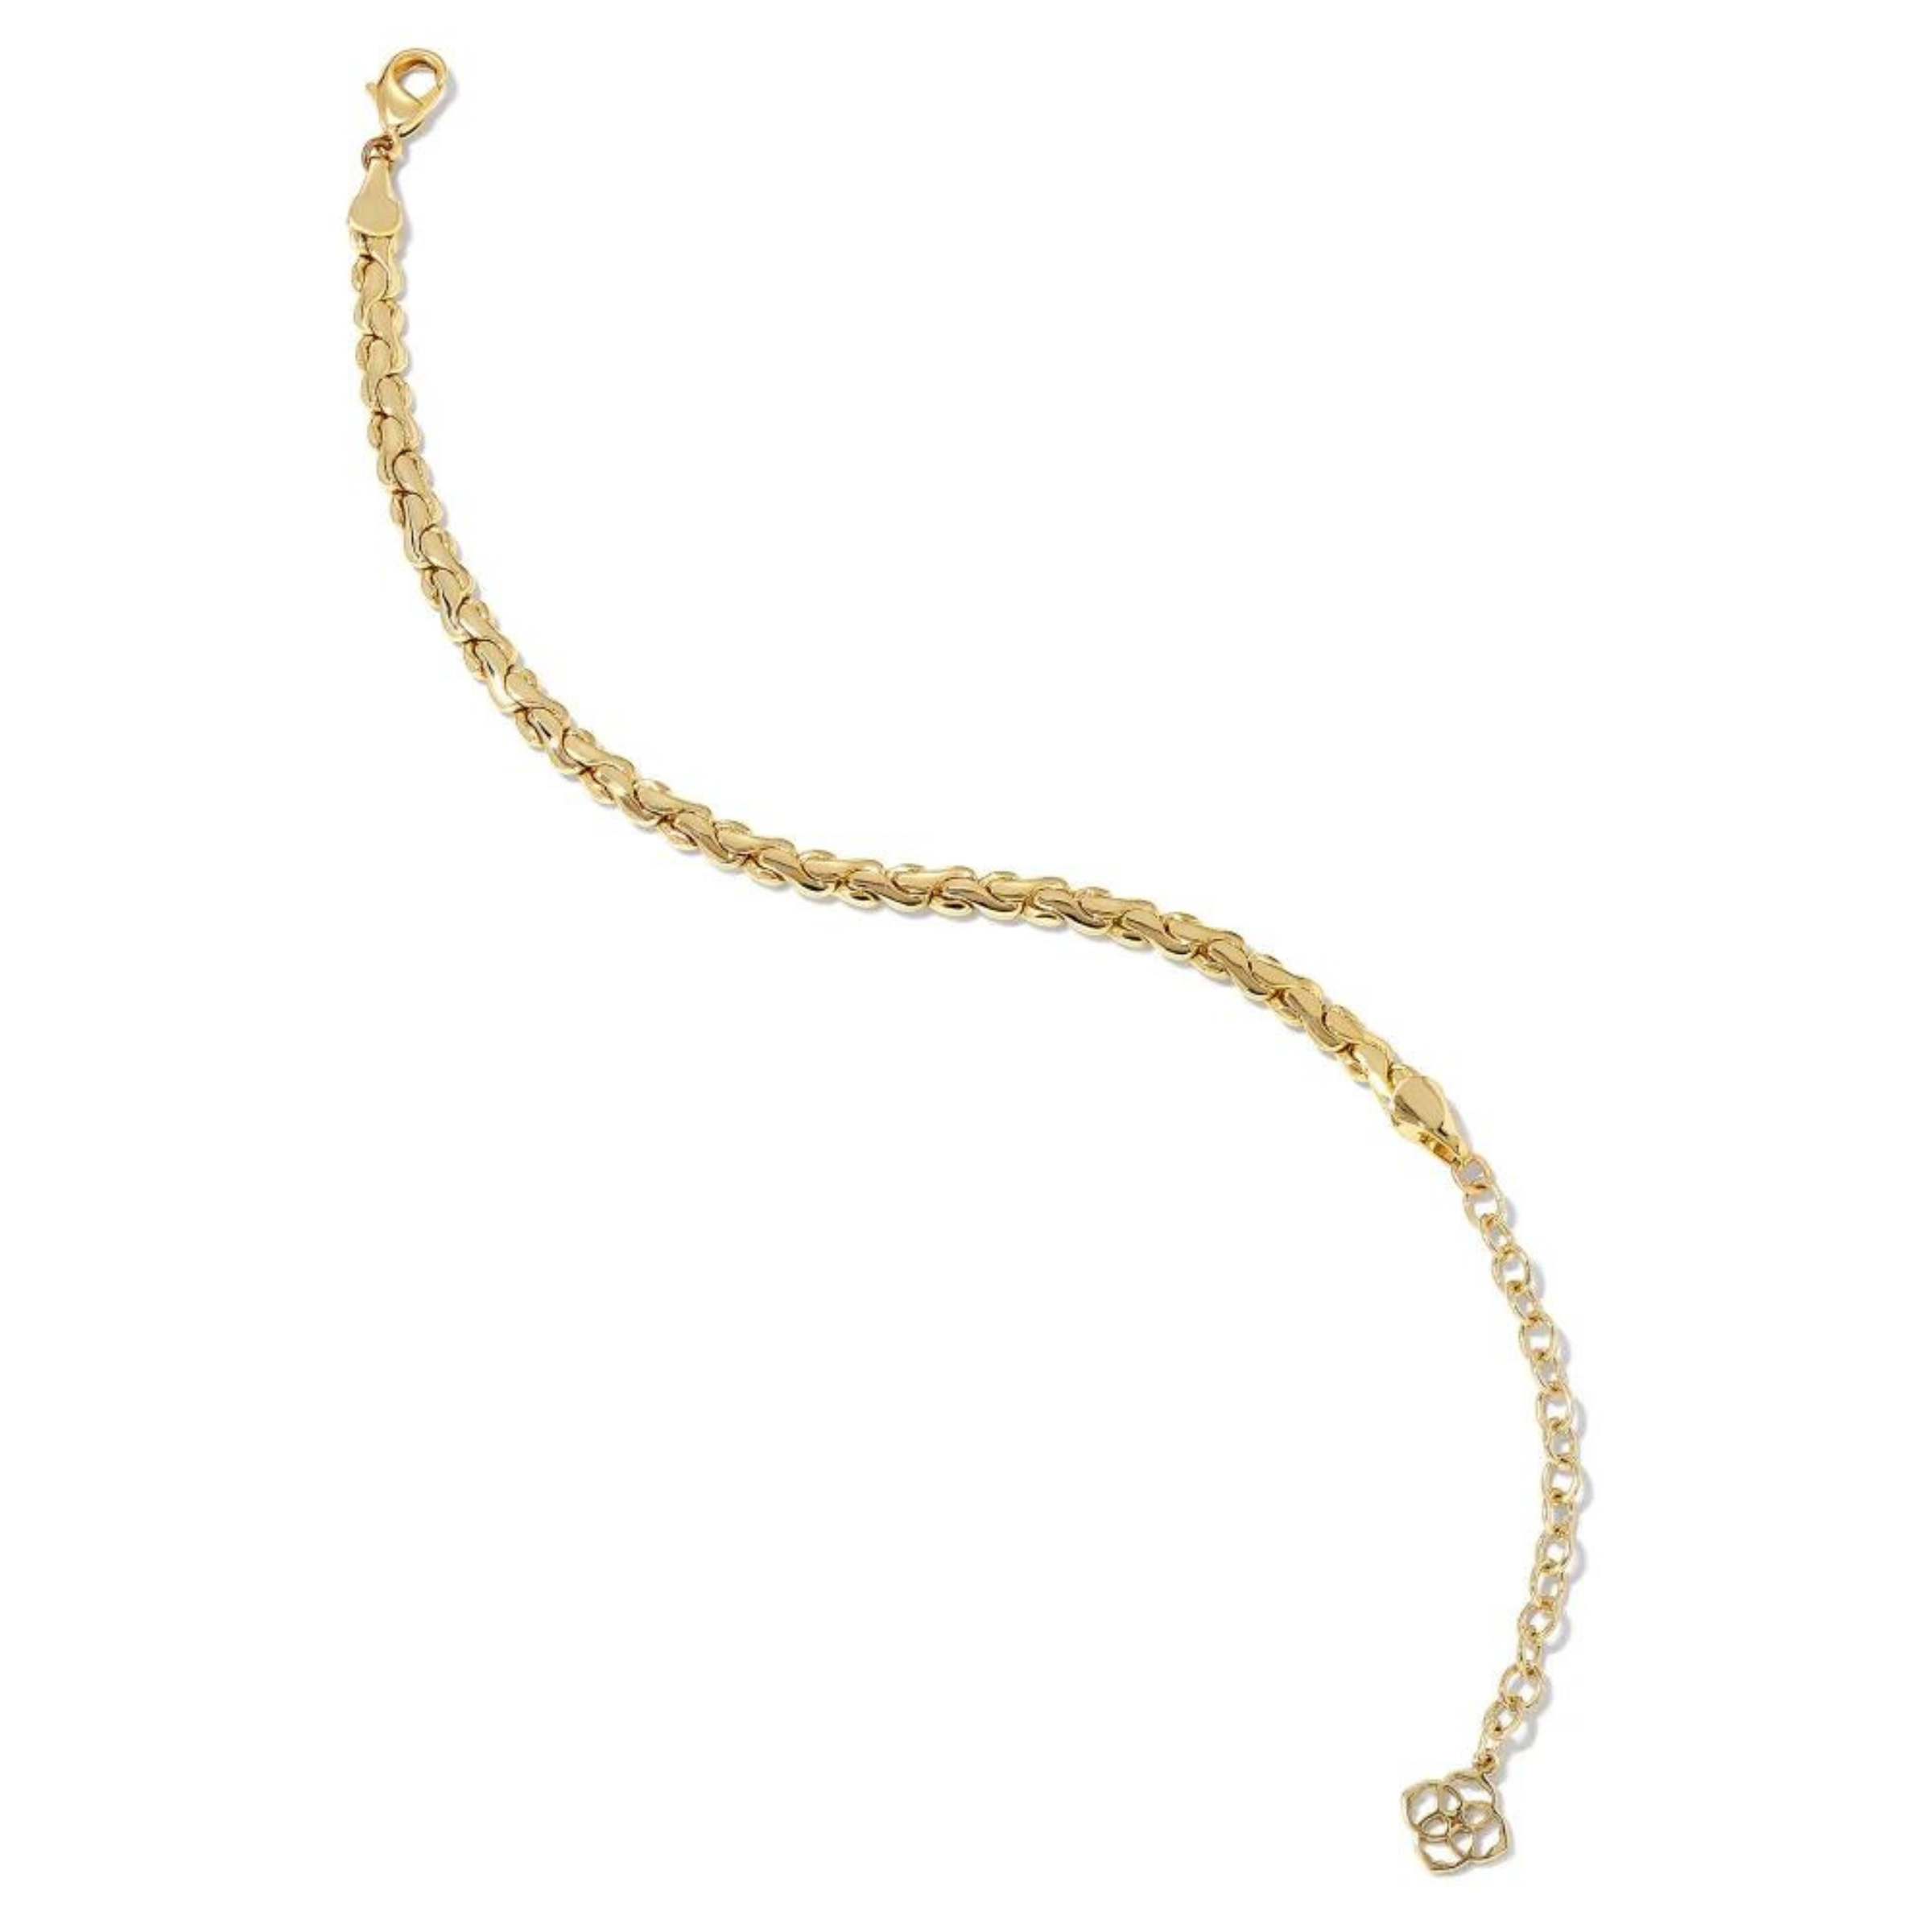 Kendra Scott | Brielle Chain Bracelet in Gold - Giddy Up Glamour Boutique